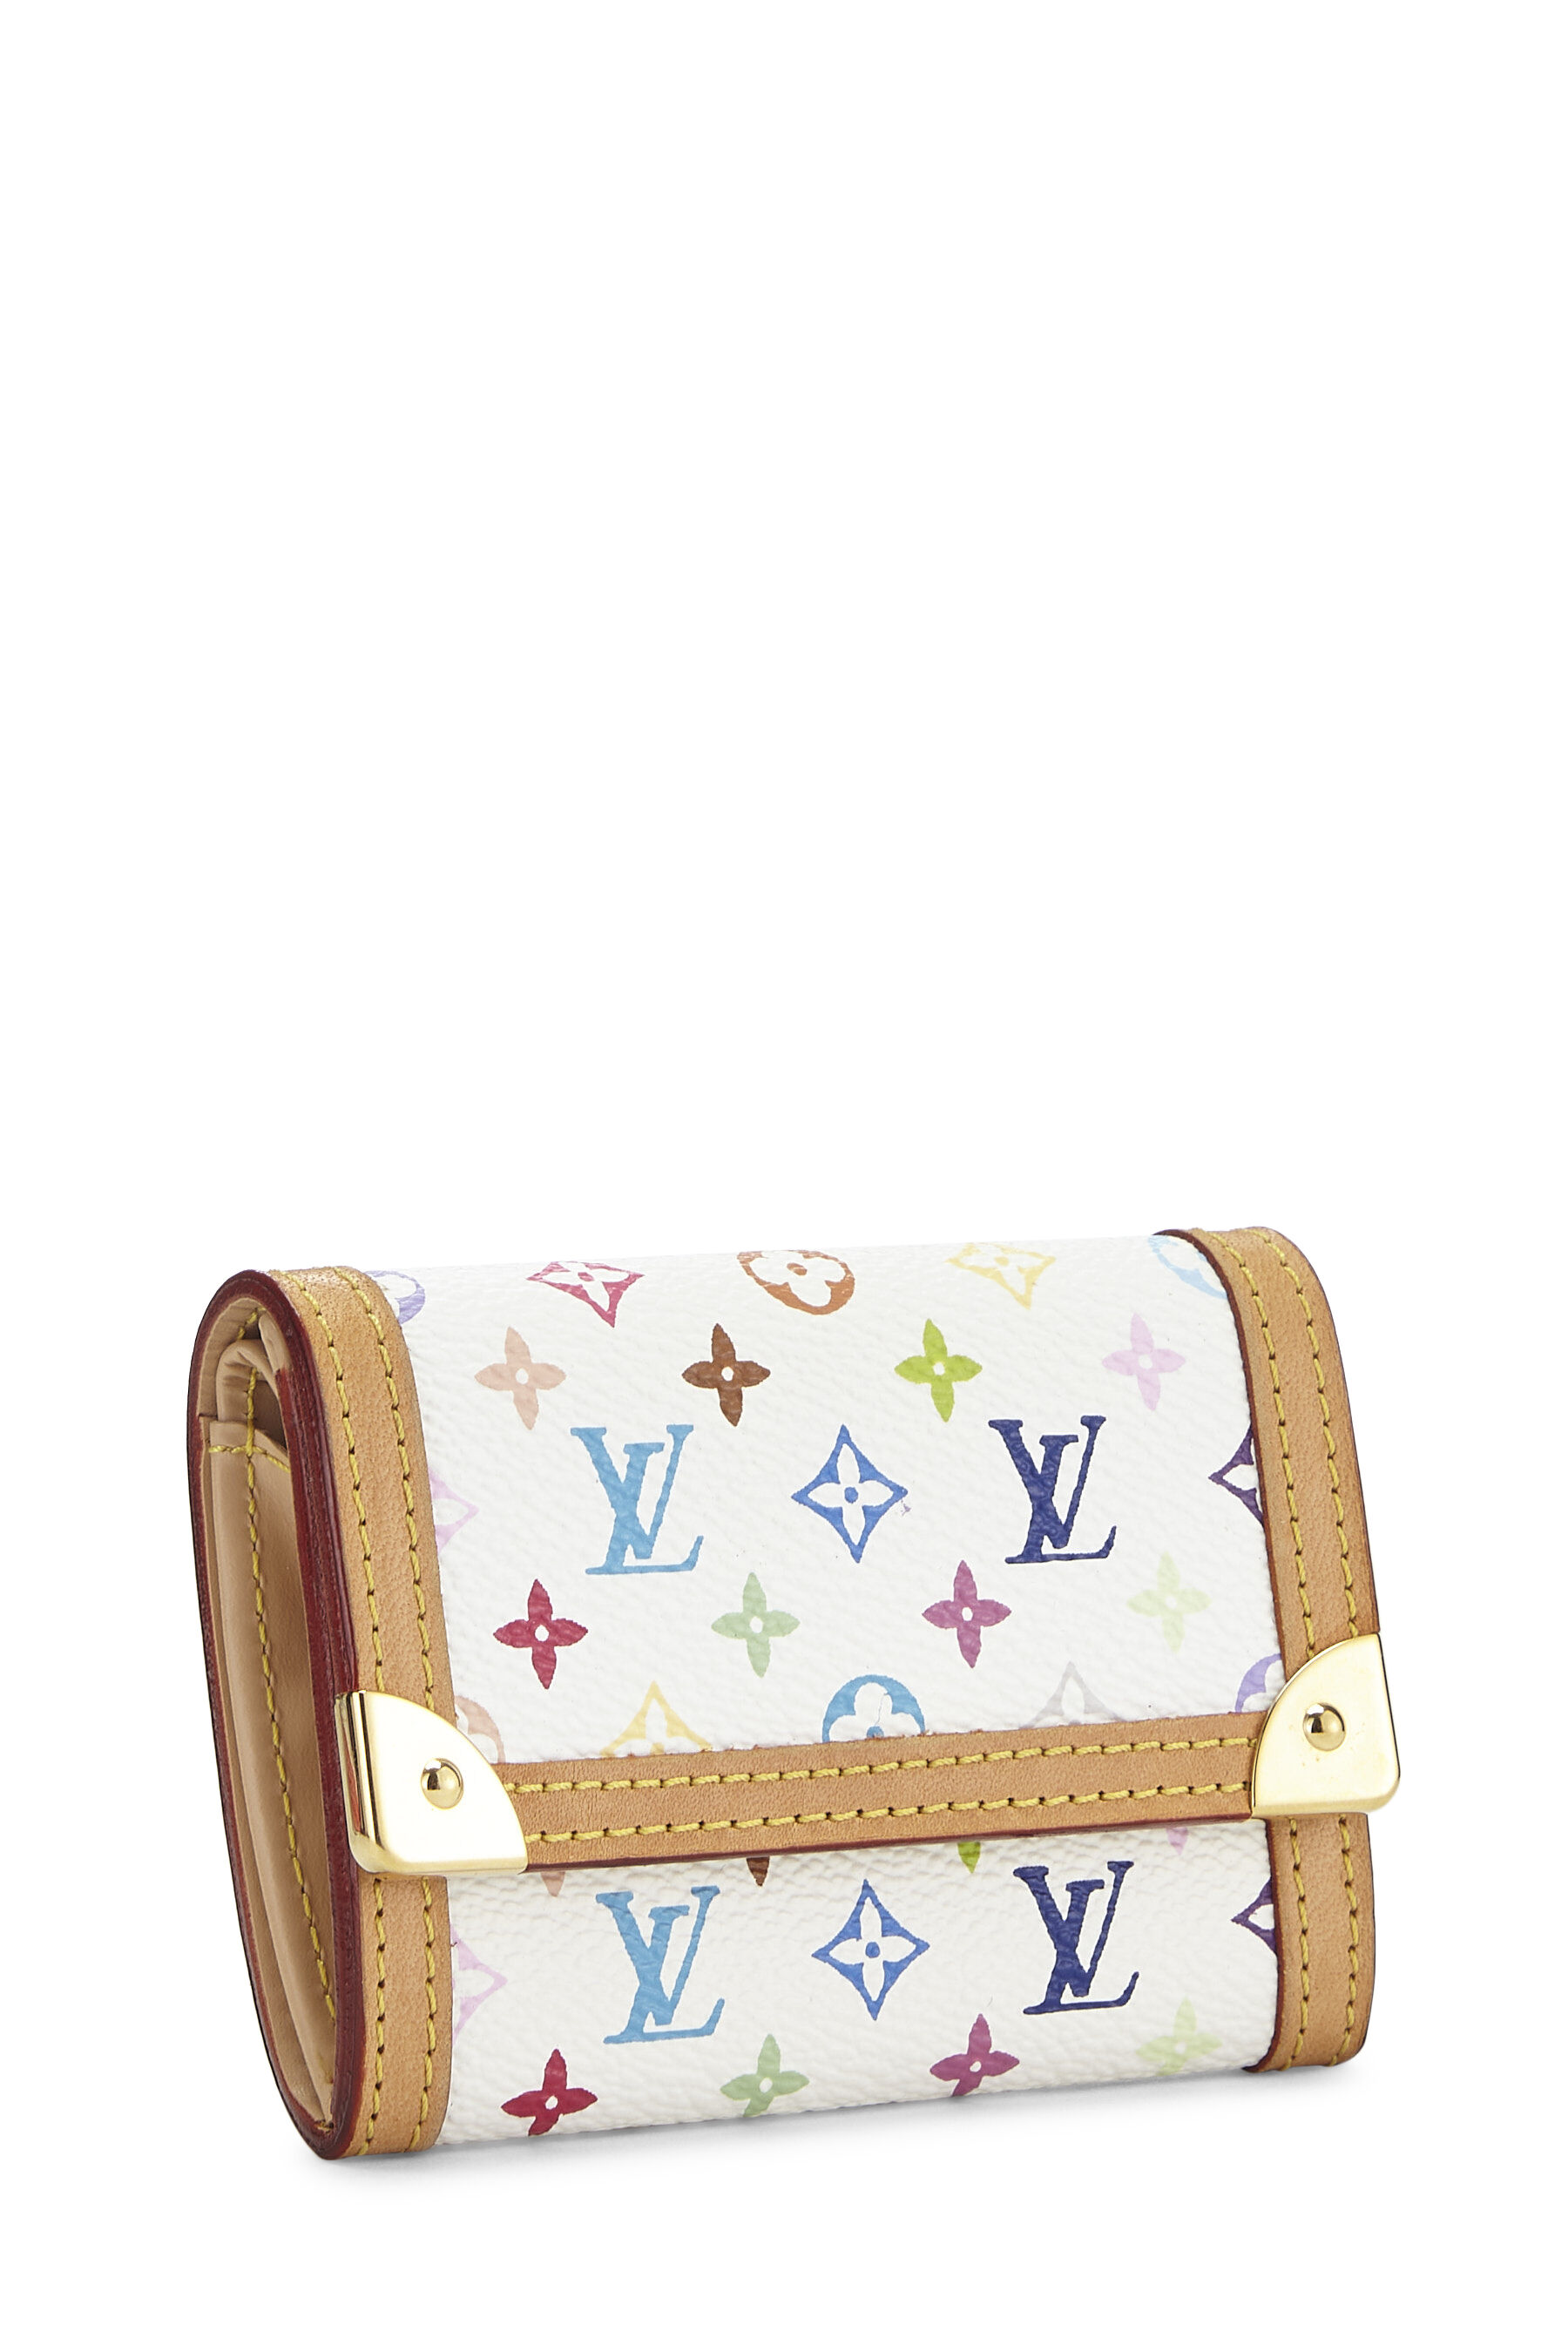 the real real louis vuitton wallet